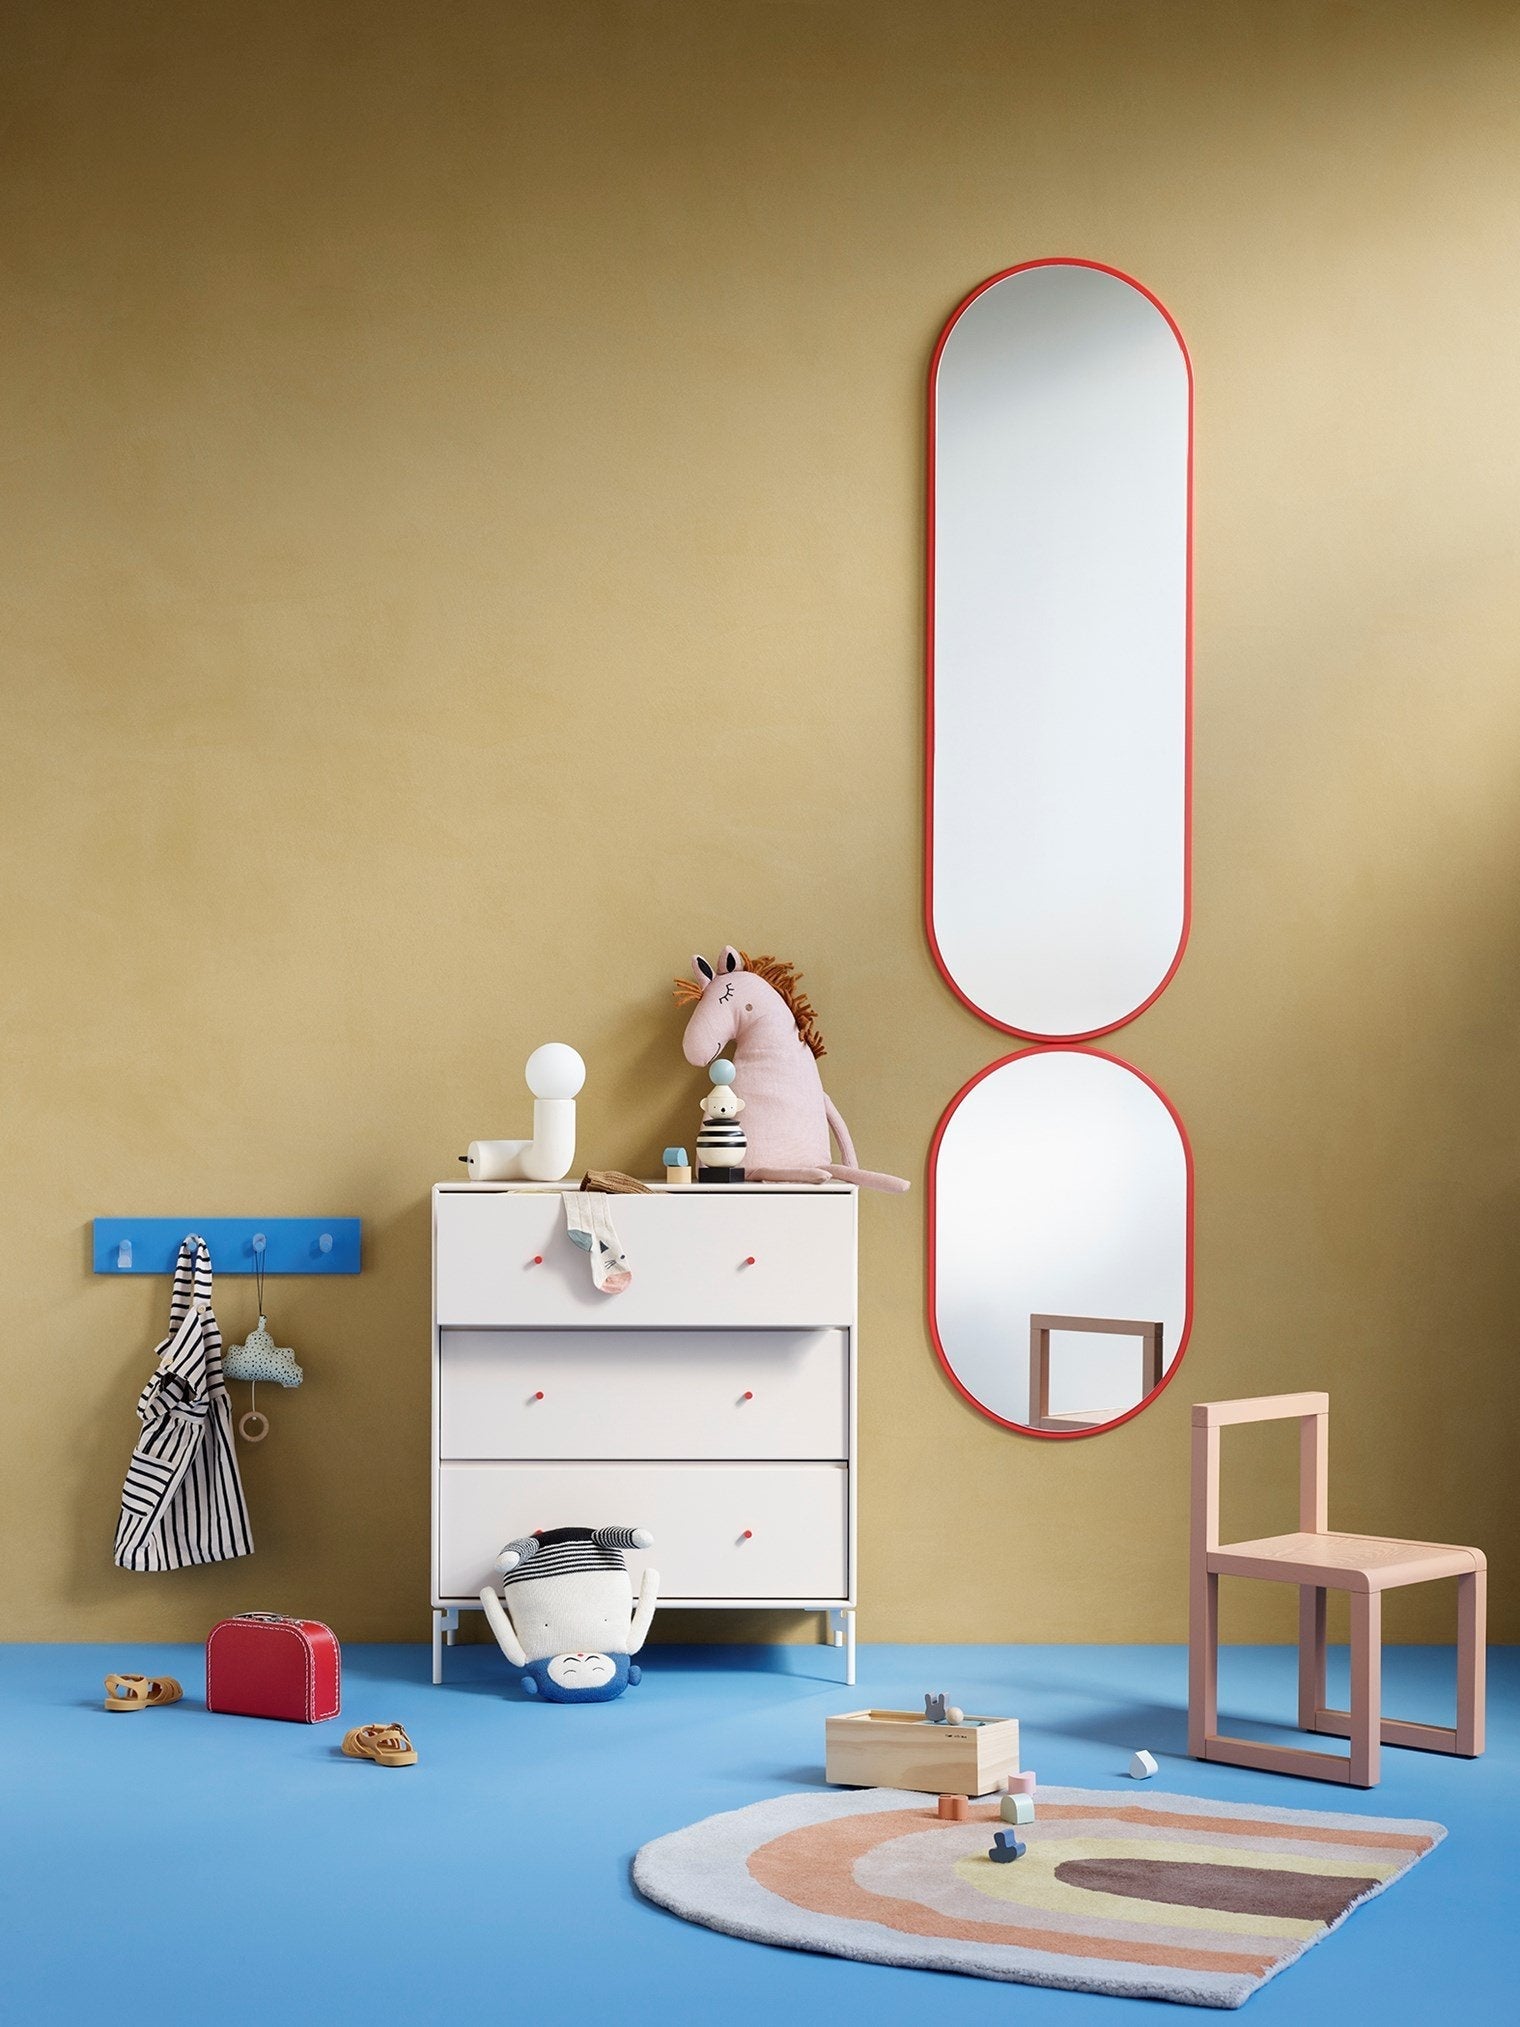 Montana Look Oval Mirror, Oyster Grey